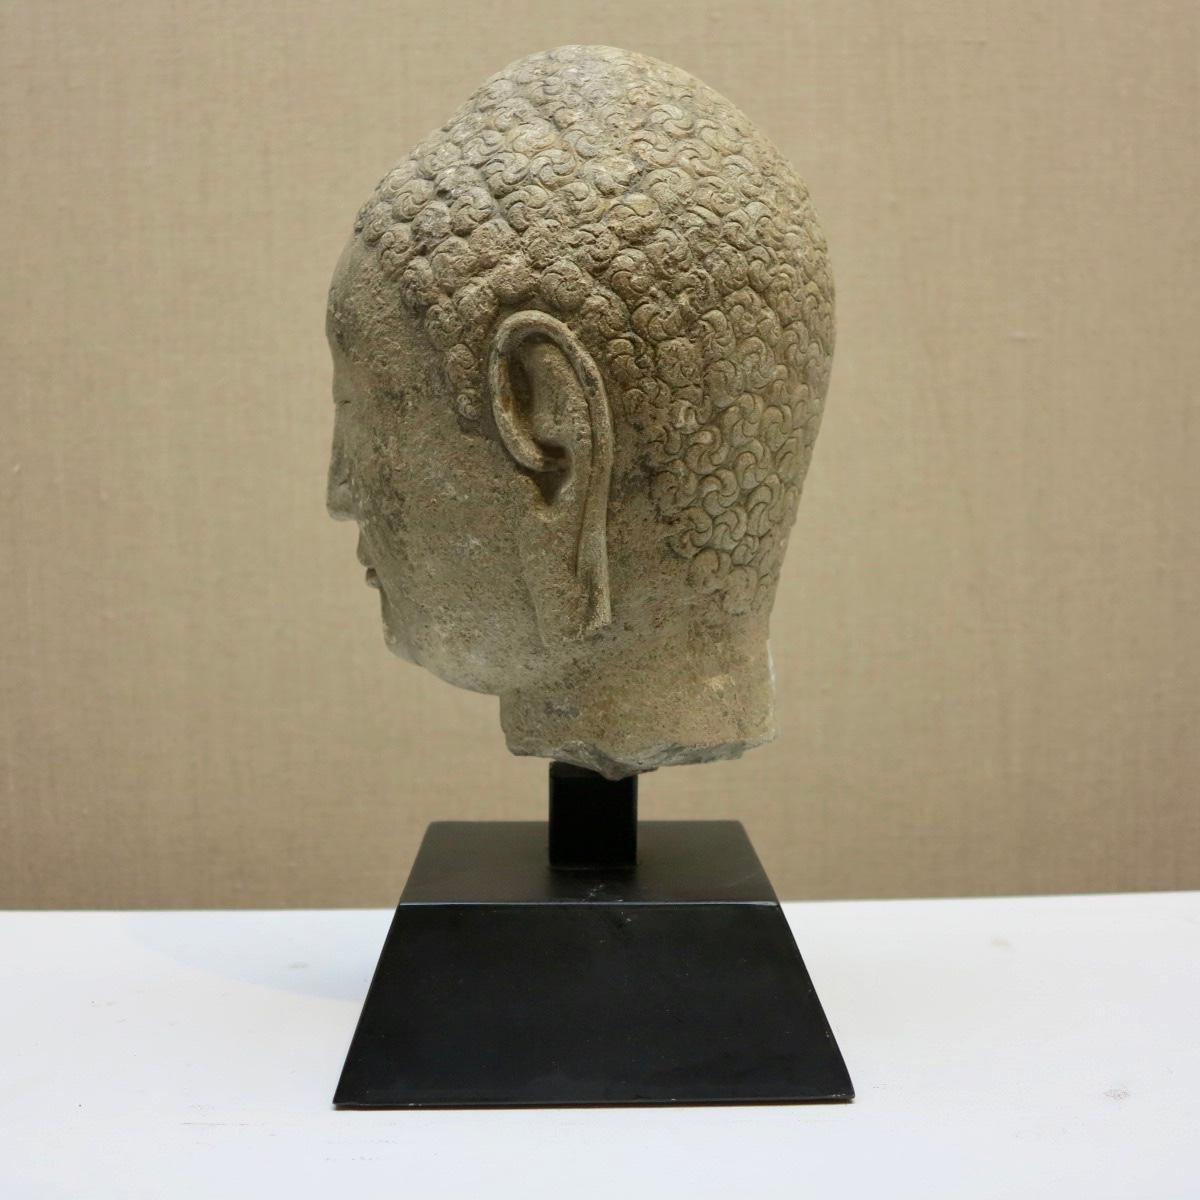 Beautiful antique Chinese head of Buddha. Qi Dynasty, 6th-century, carved limestone measures h. 8.75 in., w. 5 3/8 in., w. 6.75 in. Measures 13 inches tall on base. Footprint of base measures 6.25 inches square. Provenance: Ho Family Collection,